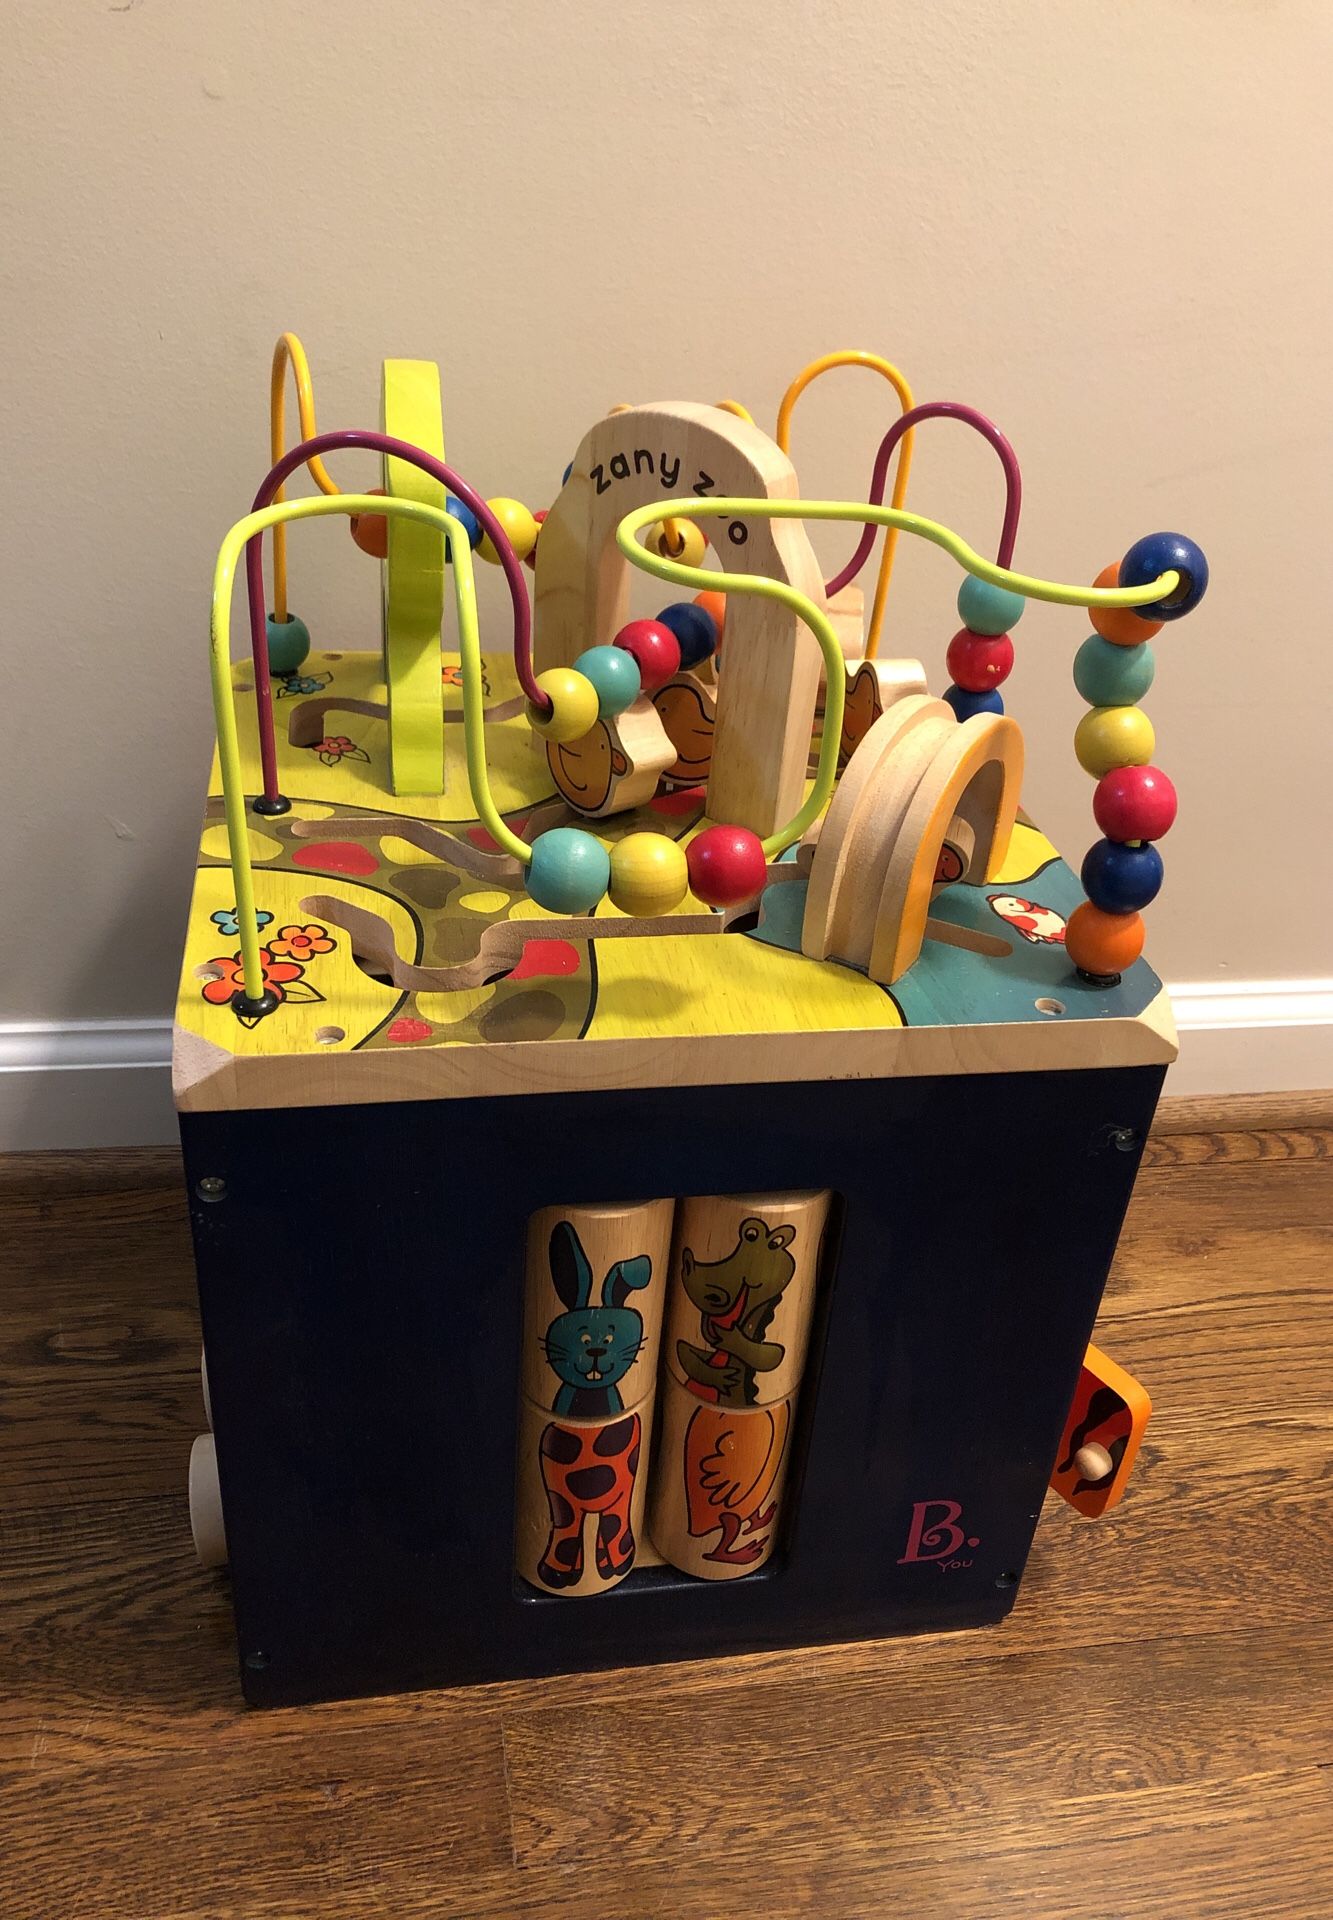 B toys zany zoo wooden play cube for toddlers